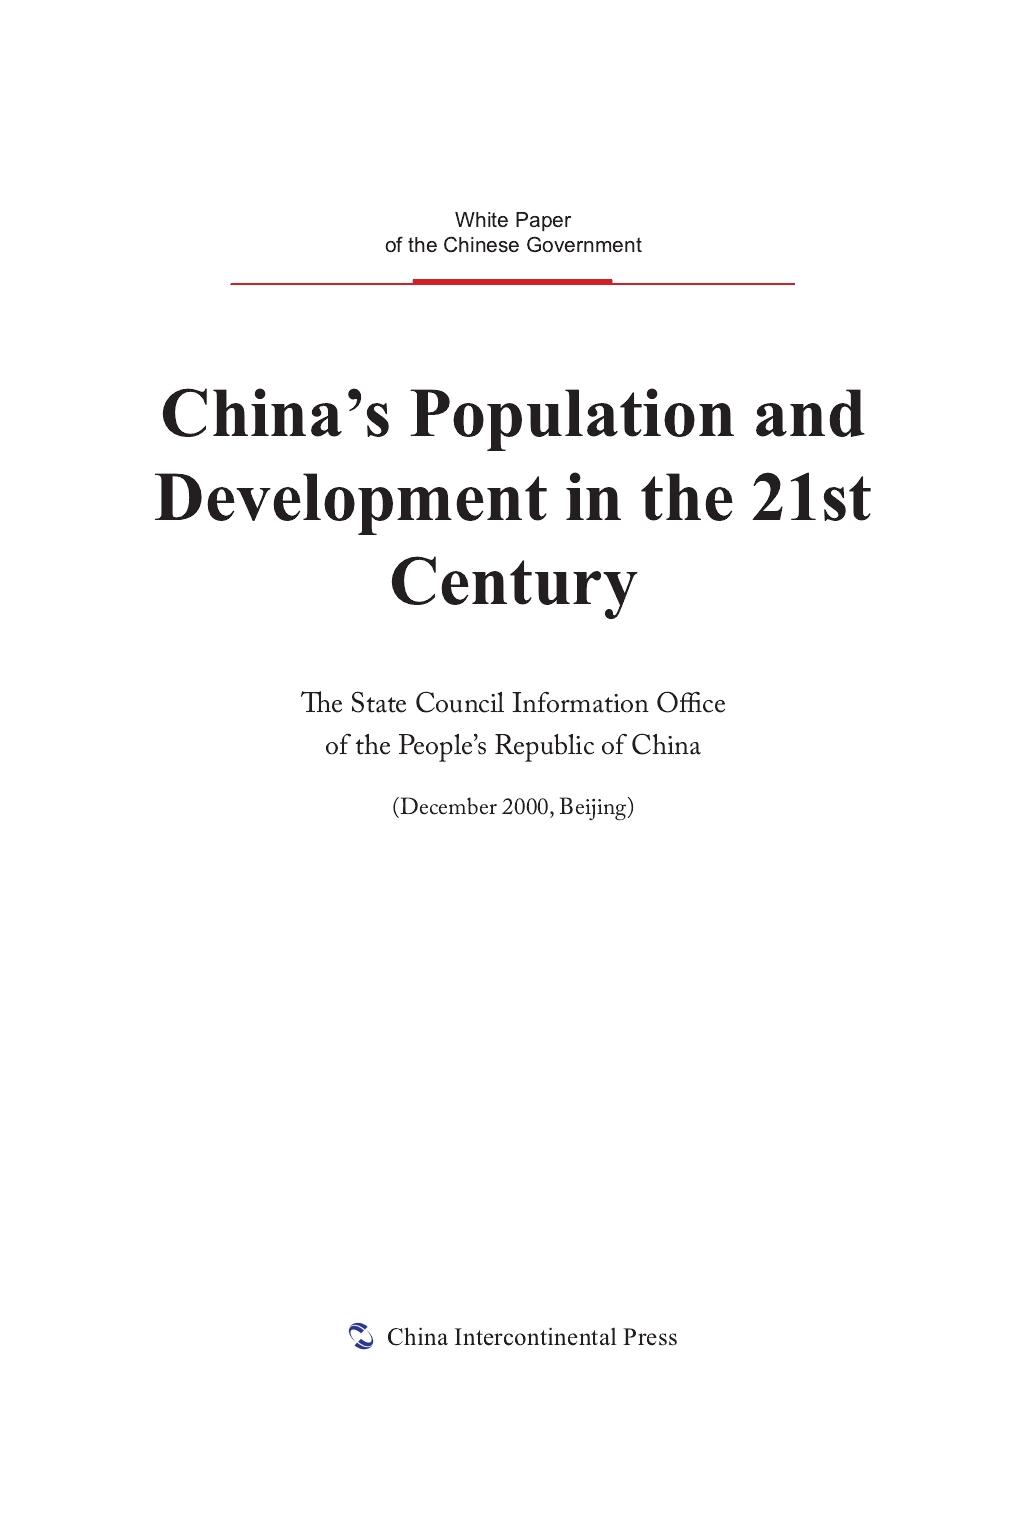 China's Population and Development in the 21st Century